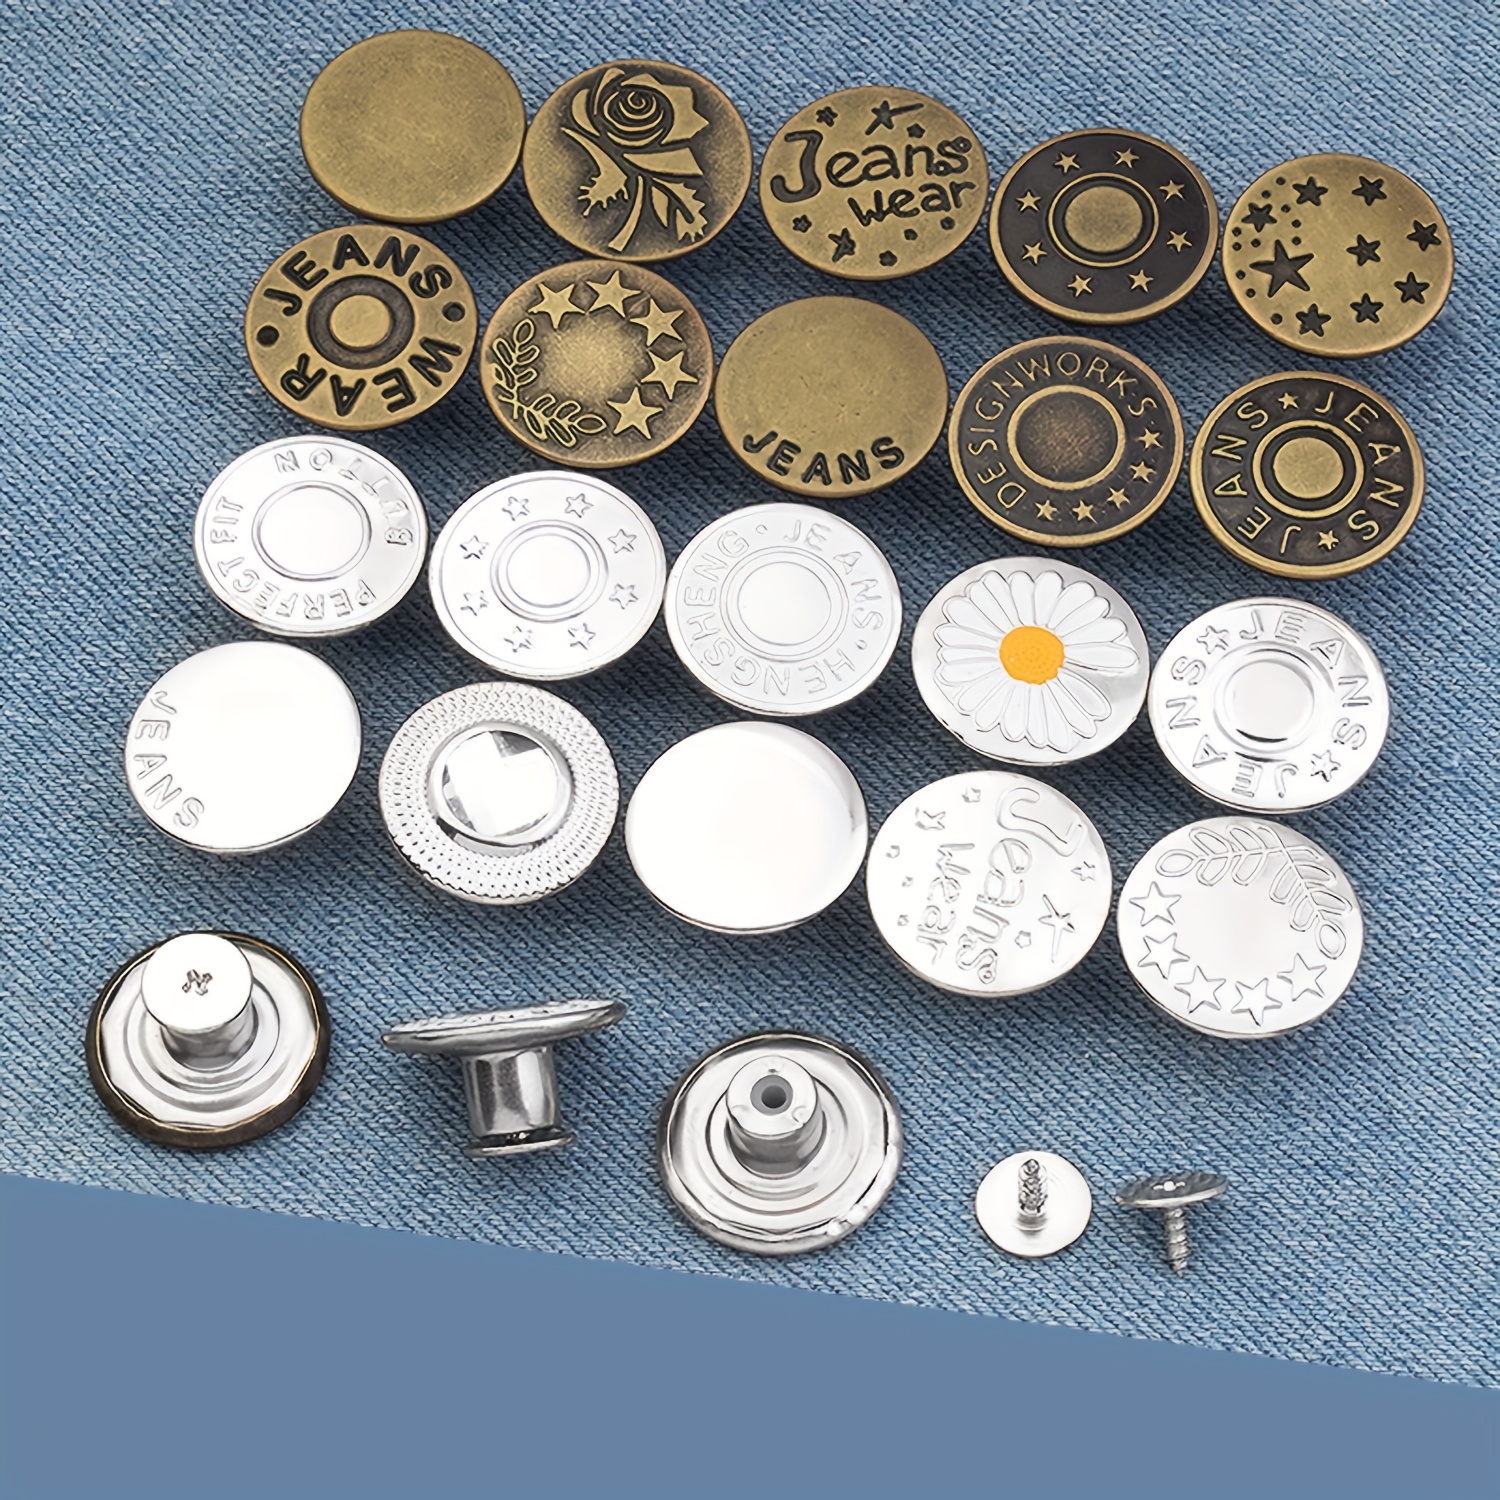 6pcs Jeans Buttons Replacement 17mm No Sewing Metal Button Repair Kit  Nailless Removable Jean Buttons Replacement Combo